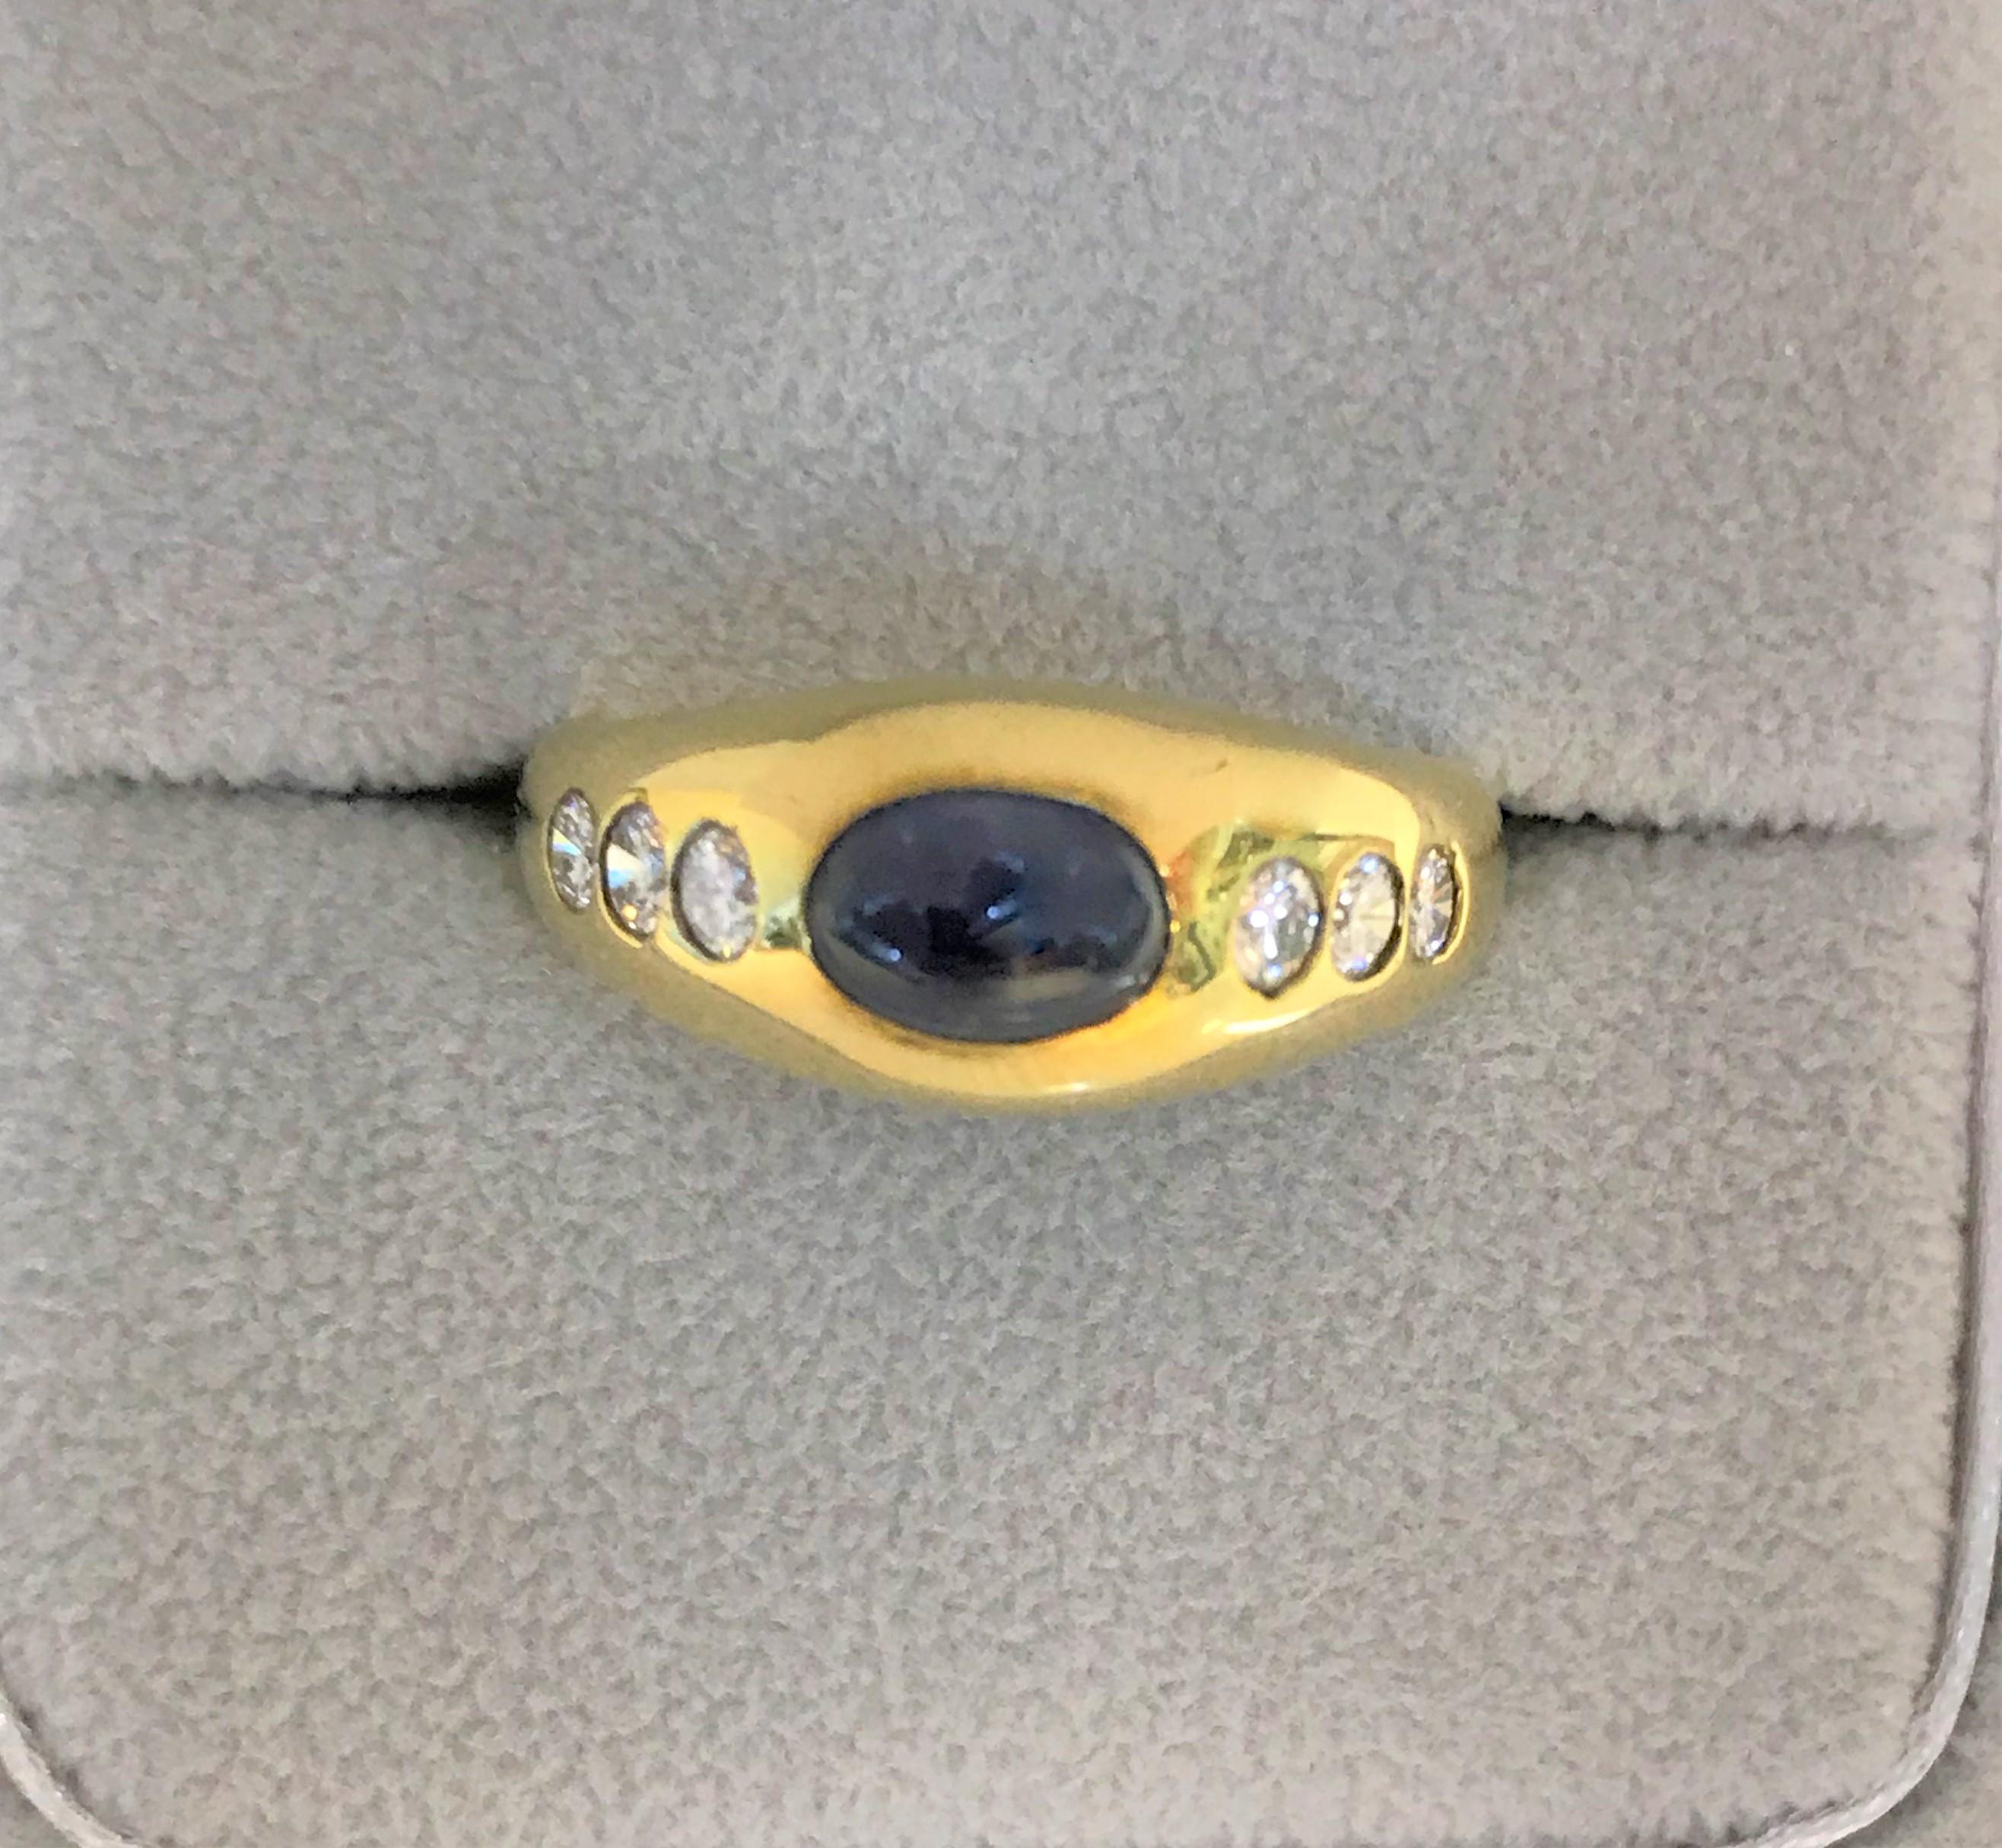 14 karat yellow gypsy style ring
Oval cabochon blue sapphire approximately 6mm x 4.5mm x 3.5mm, approximately 1.40 carat, set horizontally
6 round diamonds approximately .36 total diamond weight
Stamped 